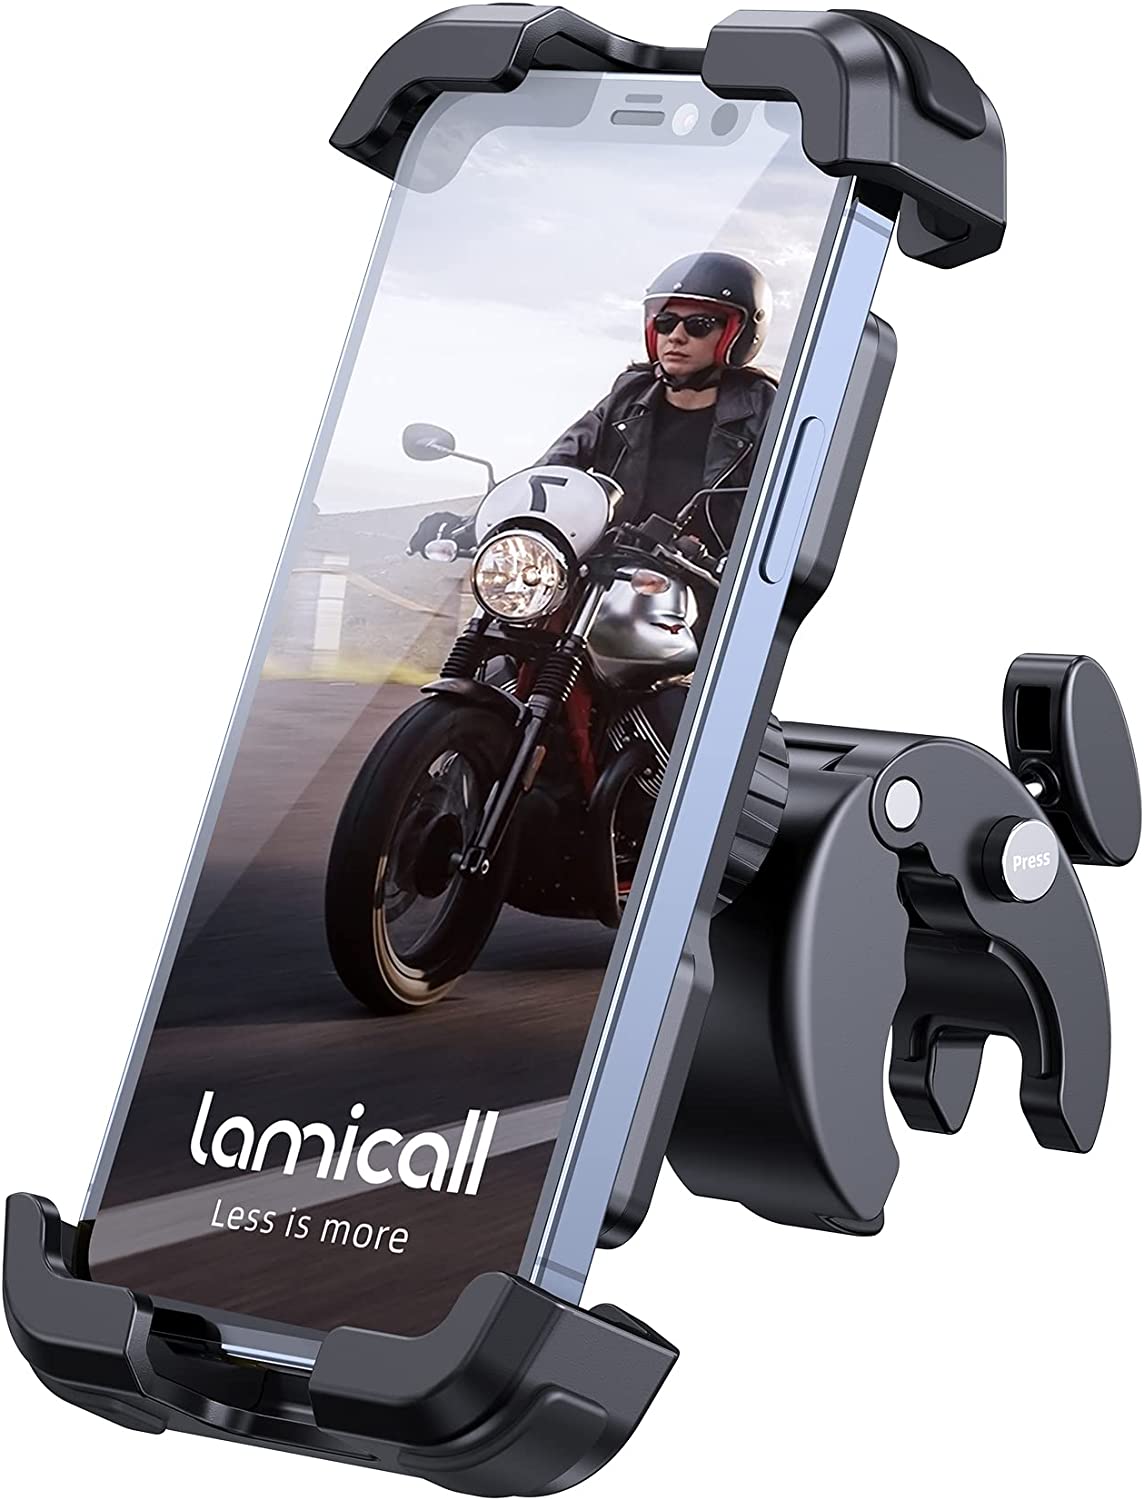 Lamicall Electric scooter phone holder